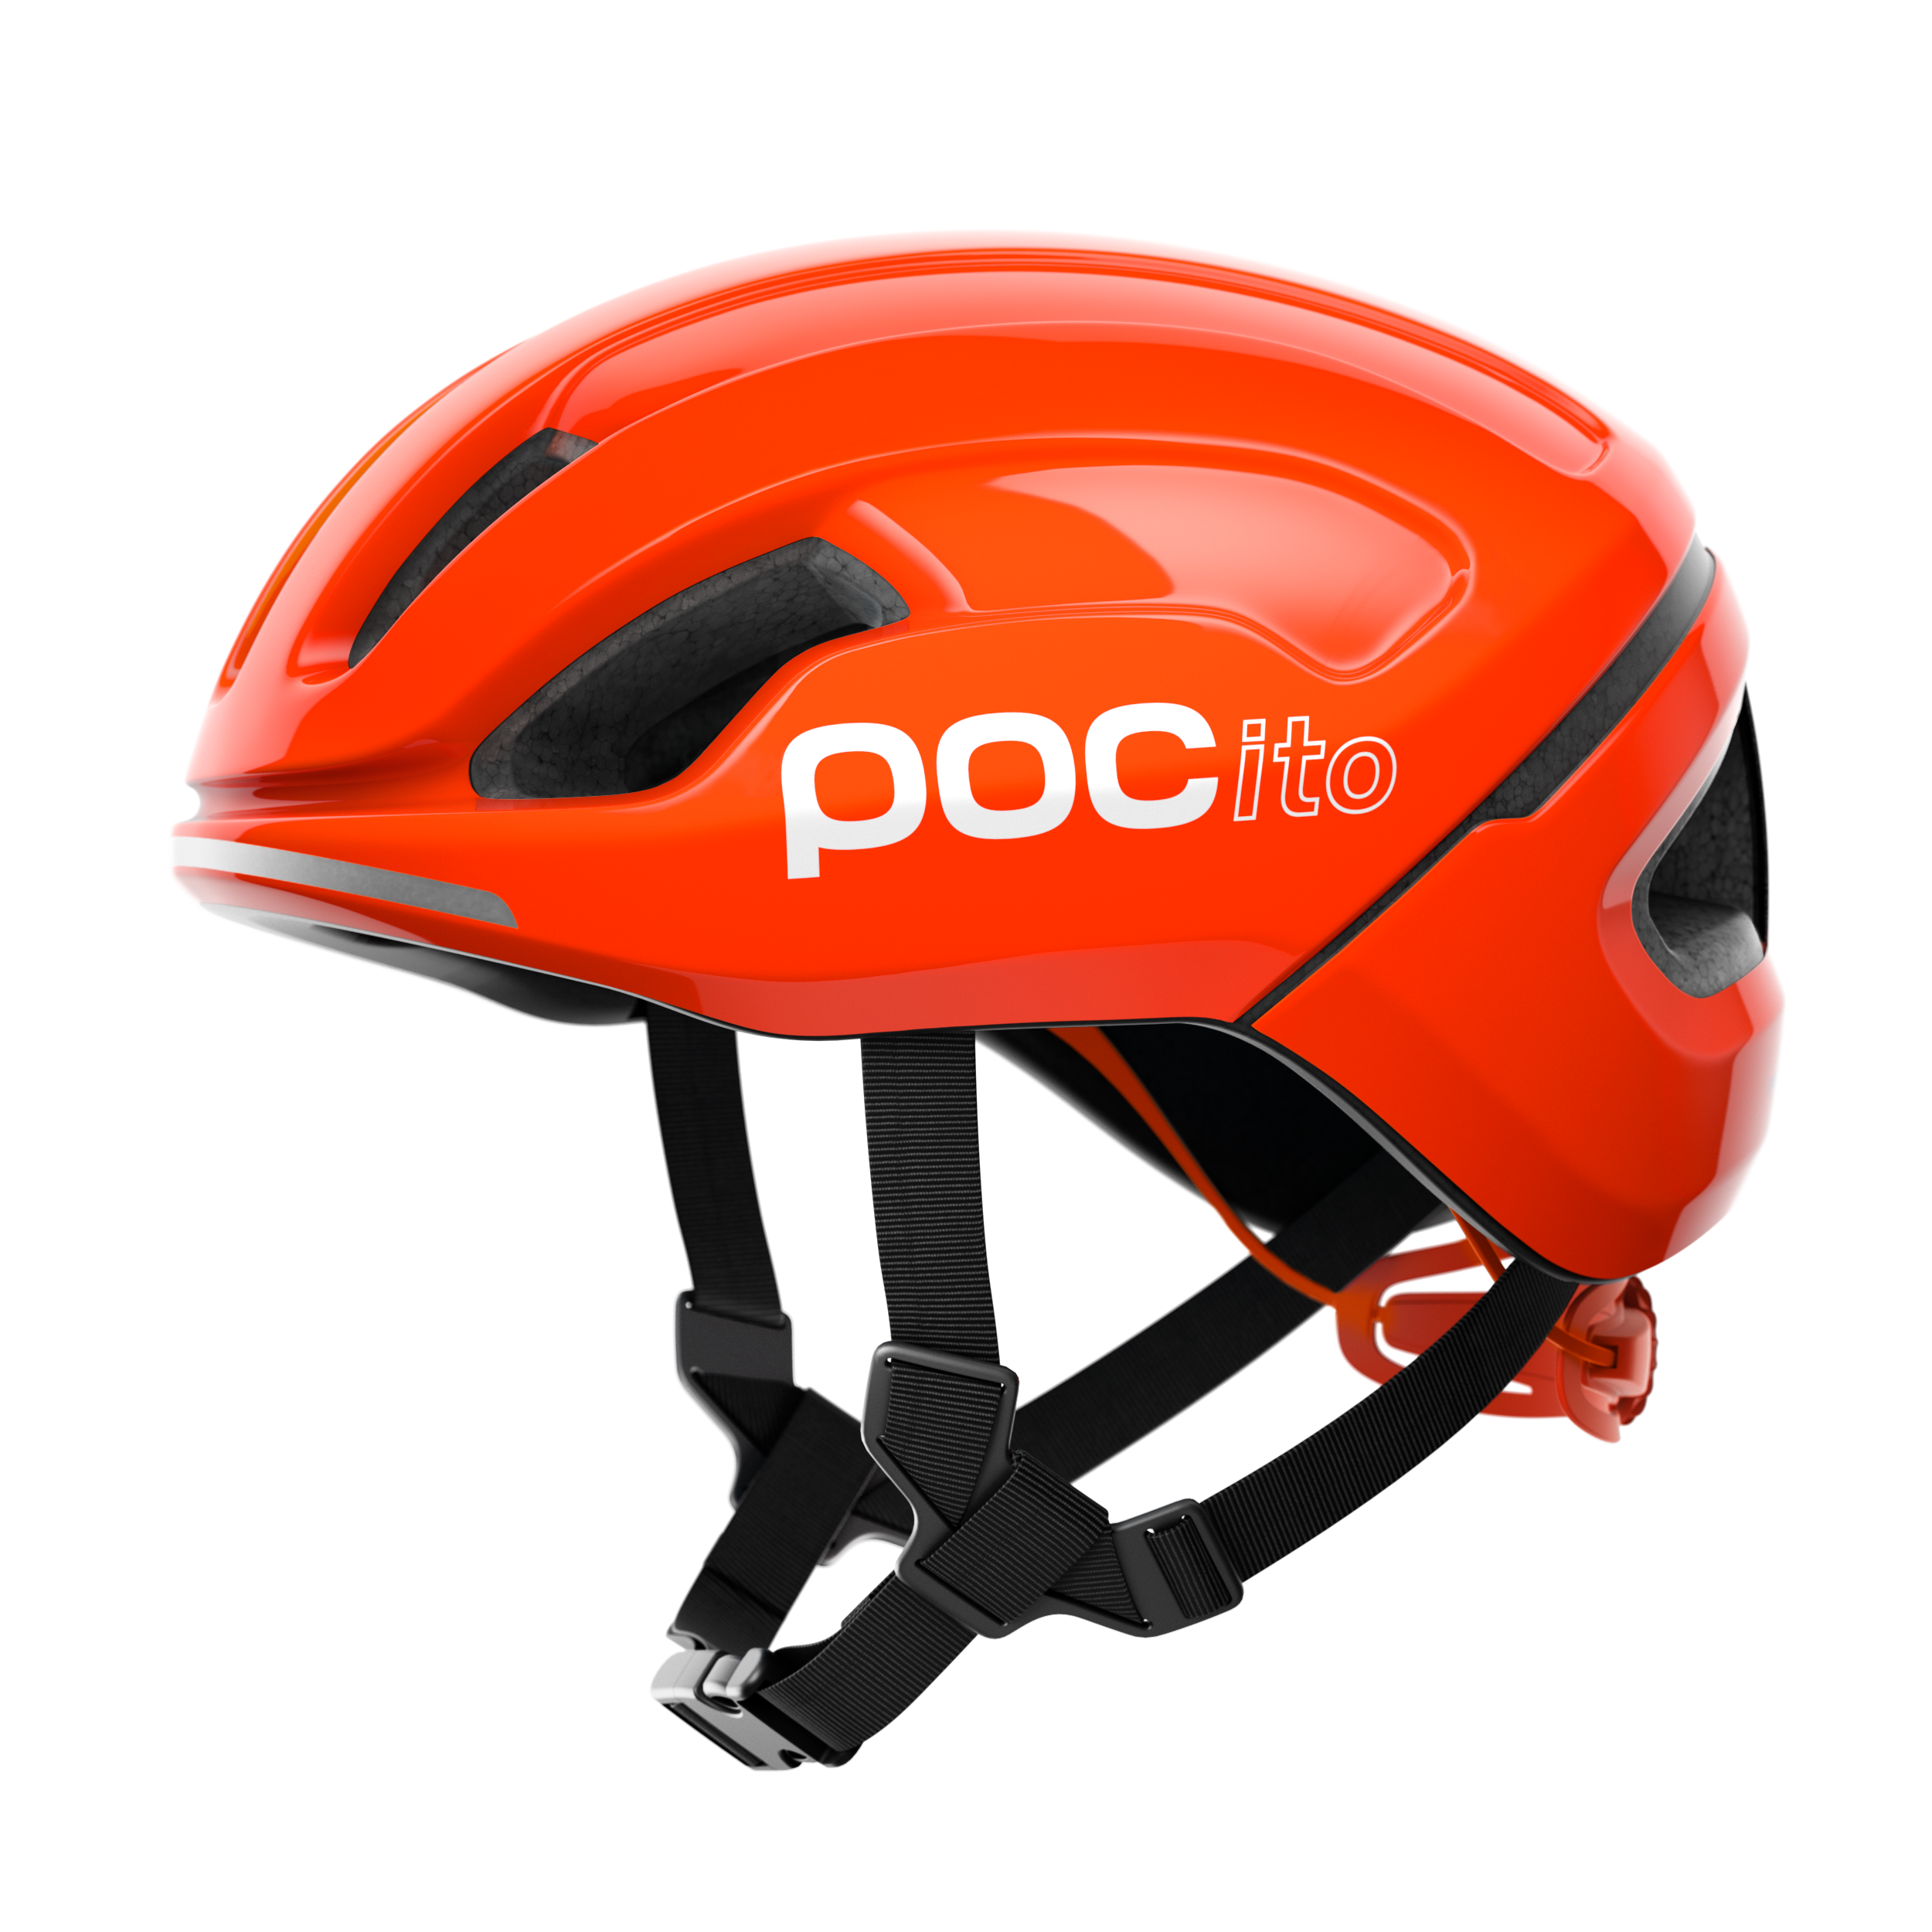 POC's POCito youth helmet is part of a line of kids' products from the brand.